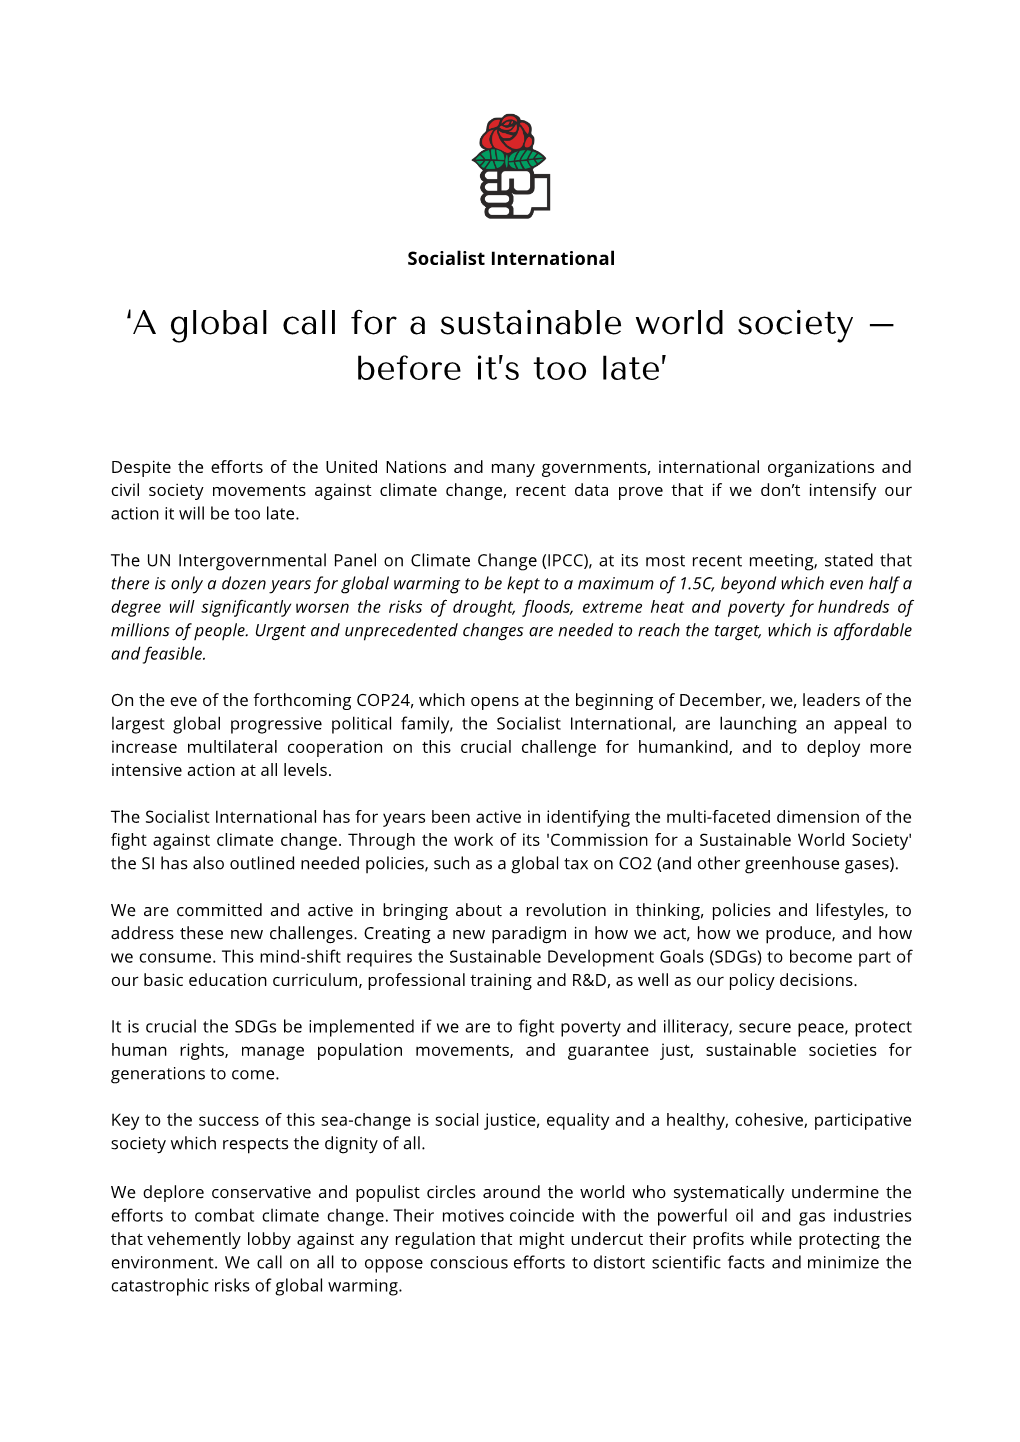 'A Global Call for a Sustainable World Society – Before It's Too Late'